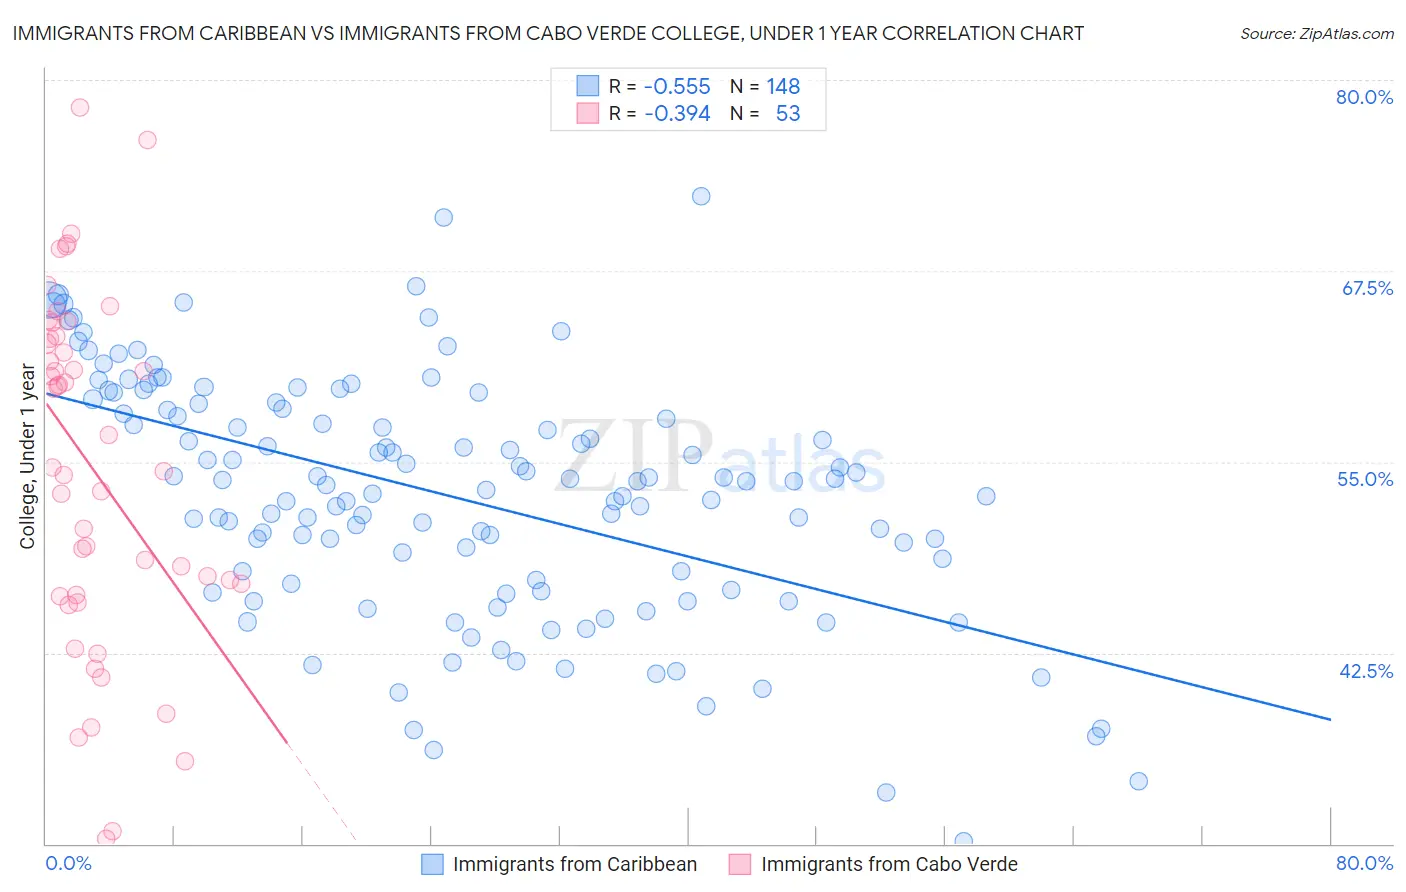 Immigrants from Caribbean vs Immigrants from Cabo Verde College, Under 1 year